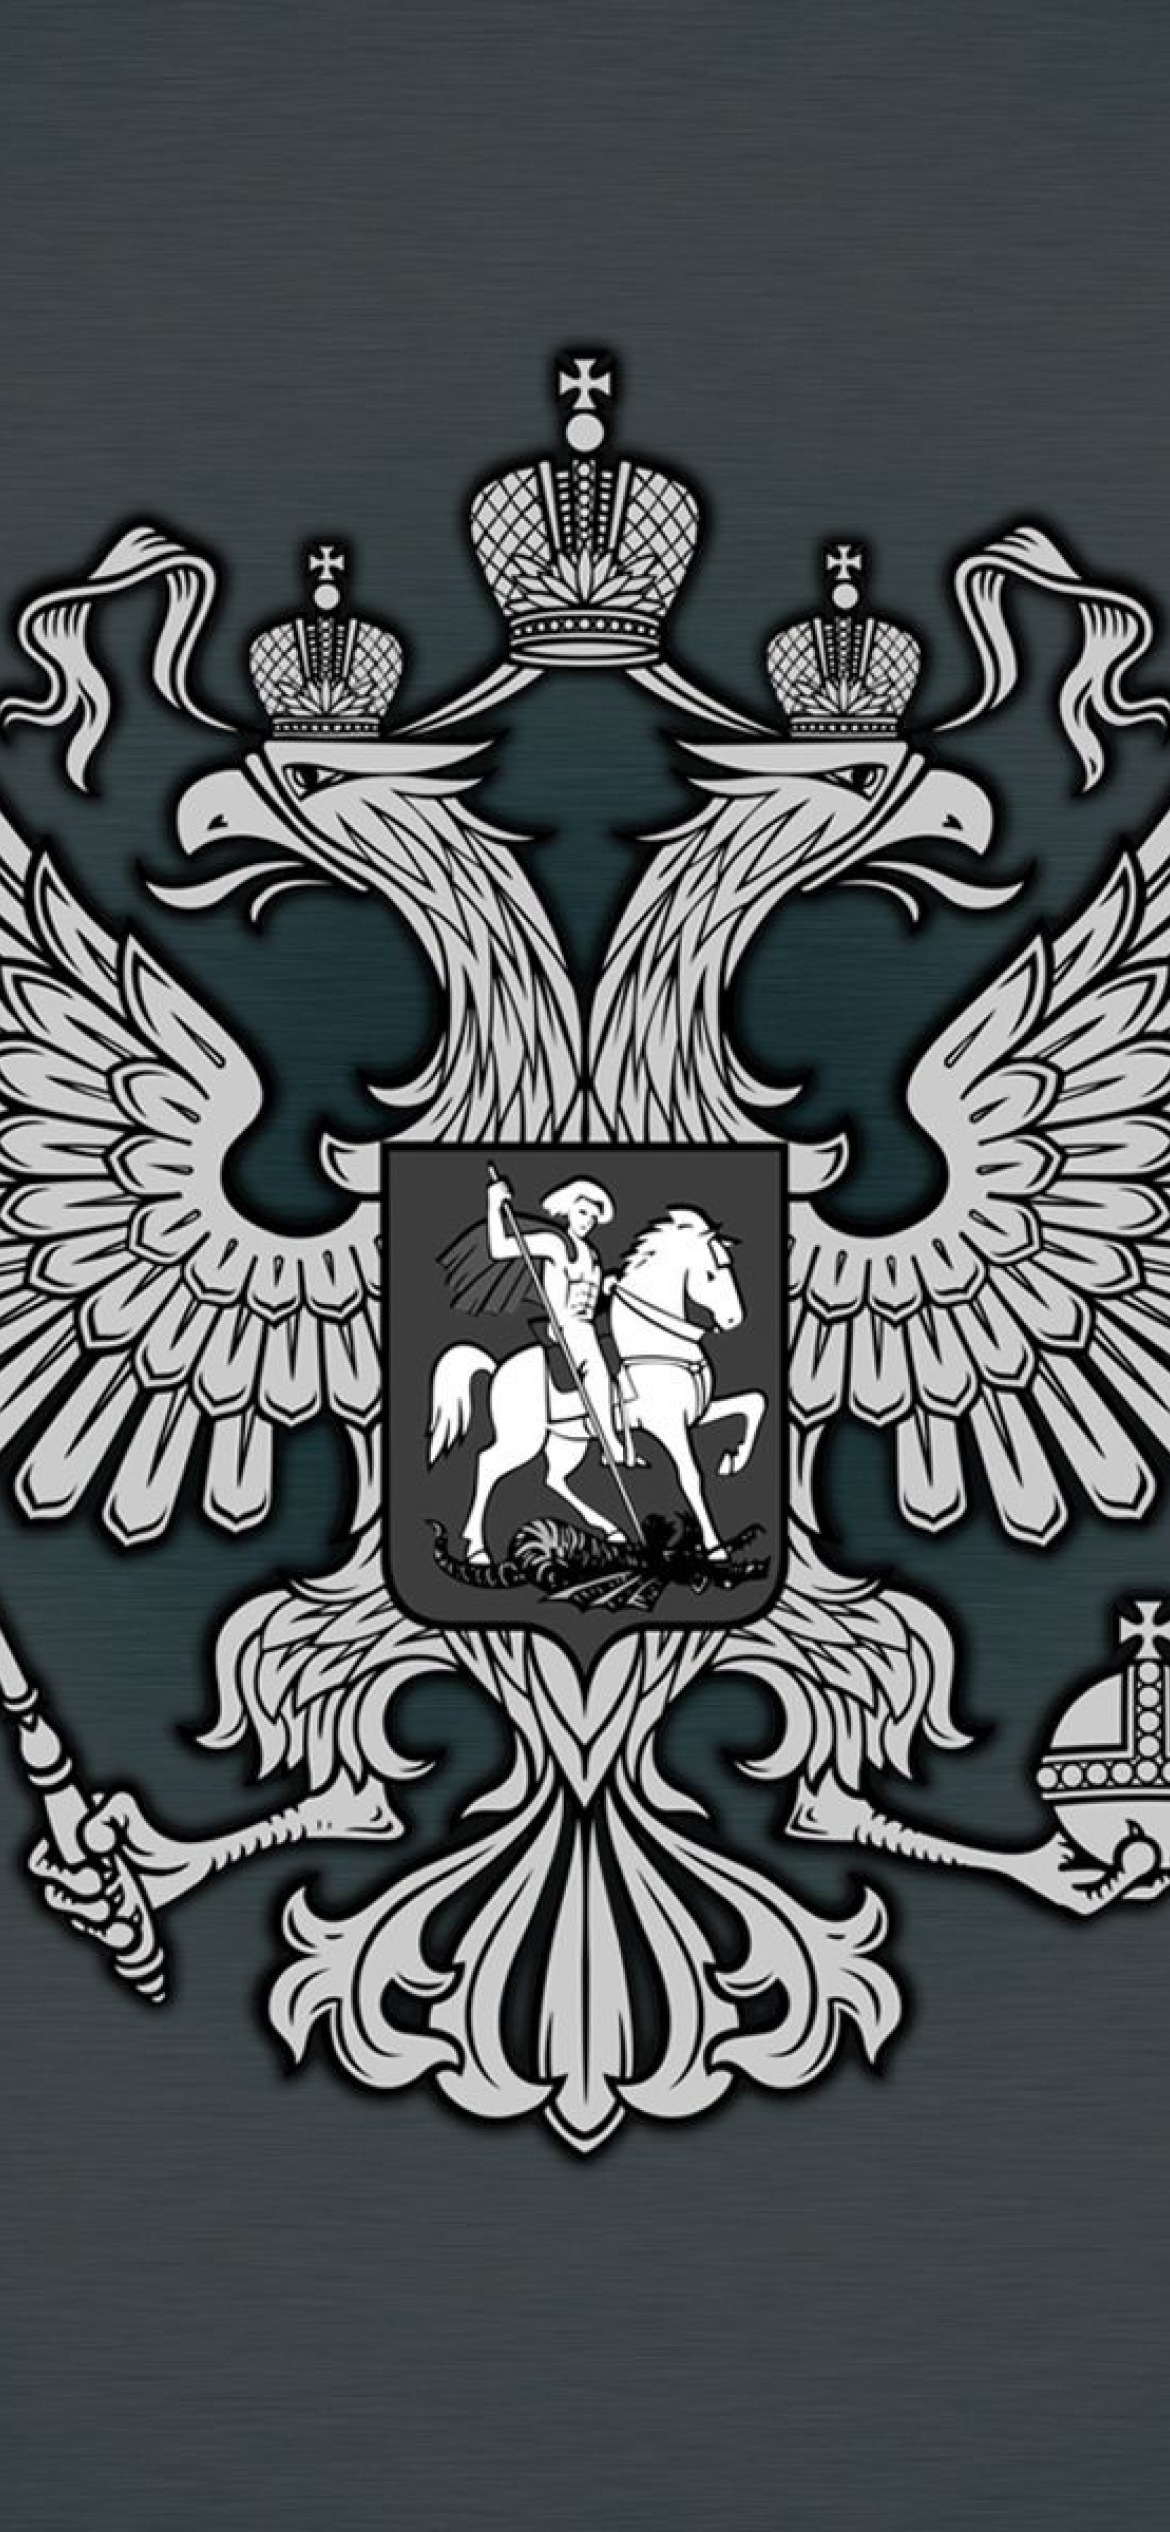 Coat of arms of Russia wallpaper 1170x2532